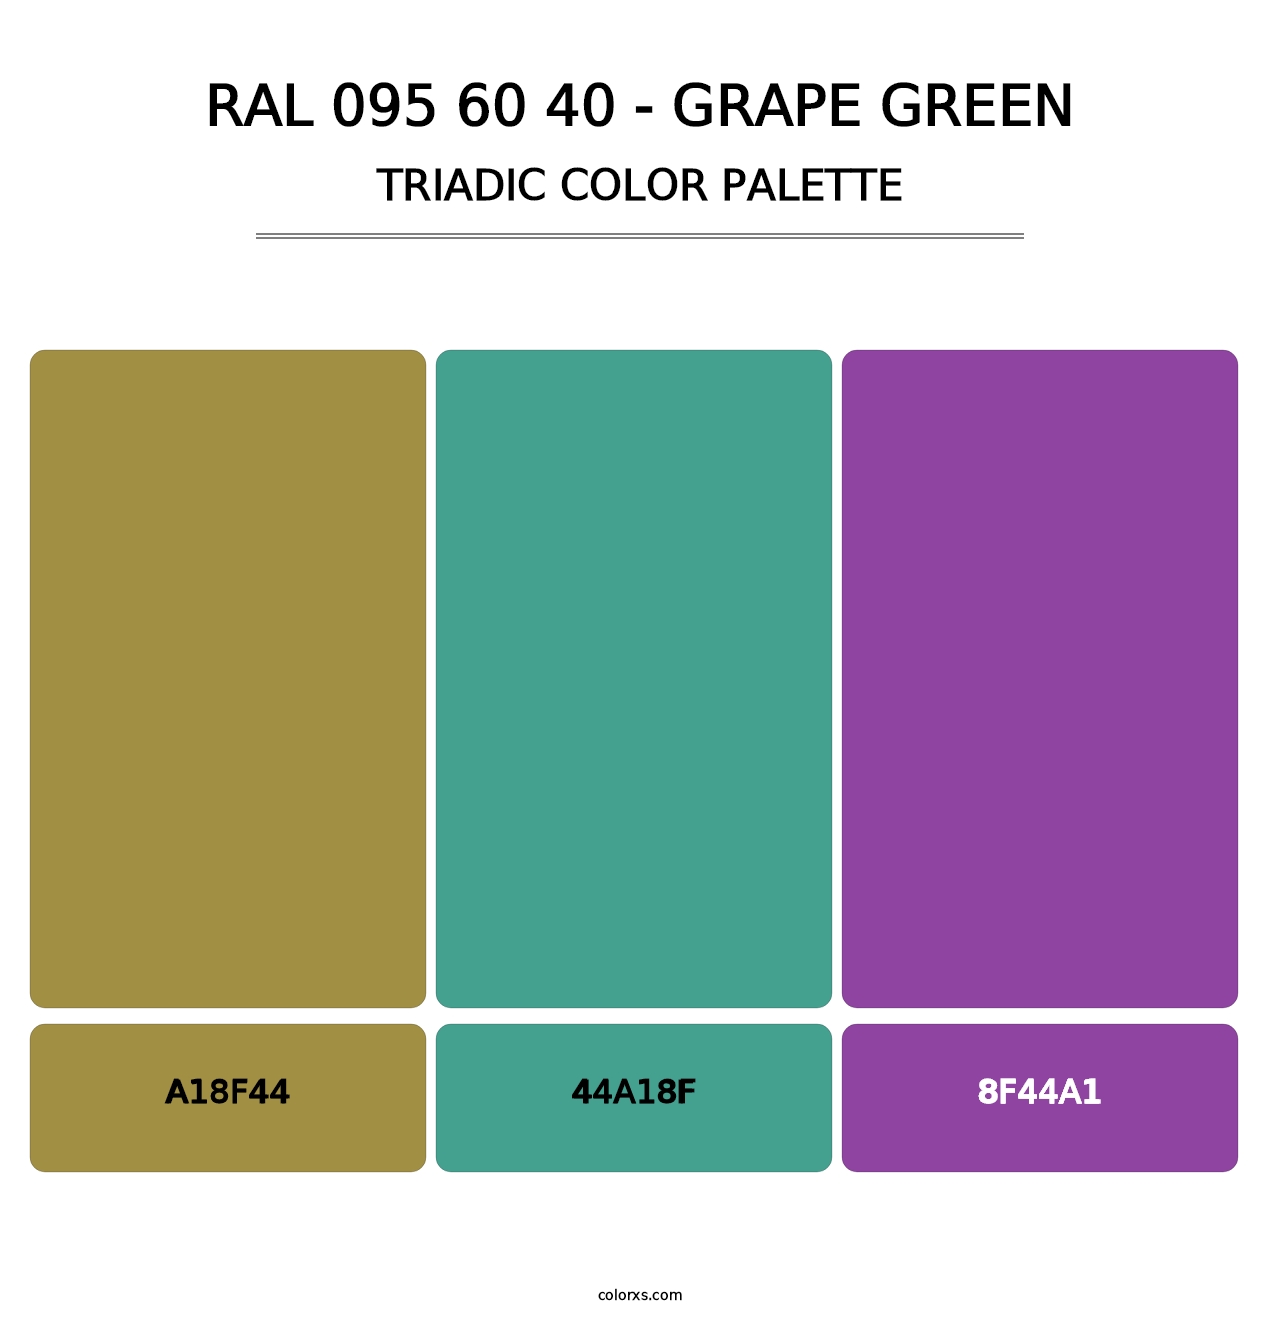 RAL 095 60 40 - Grape Green - Triadic Color Palette